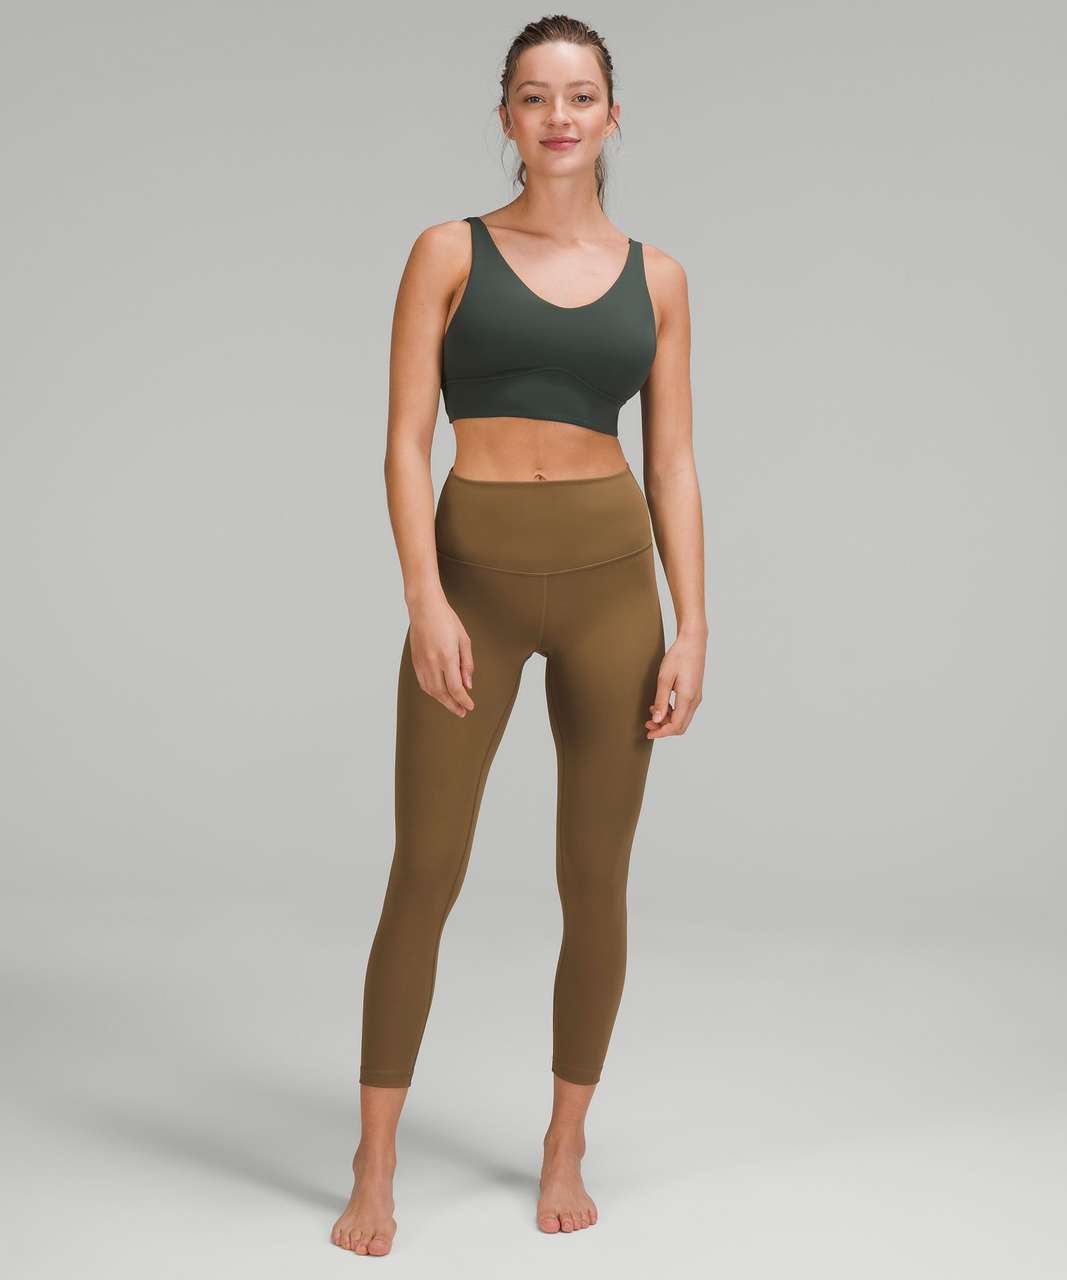 lululemon New Zealand - Our Tightest Stuff High-Rise Tight are a keeper.  Powered by our supportive Luxtreme™ fabric, we designed them with a tight  fit that supports your major muscles during running